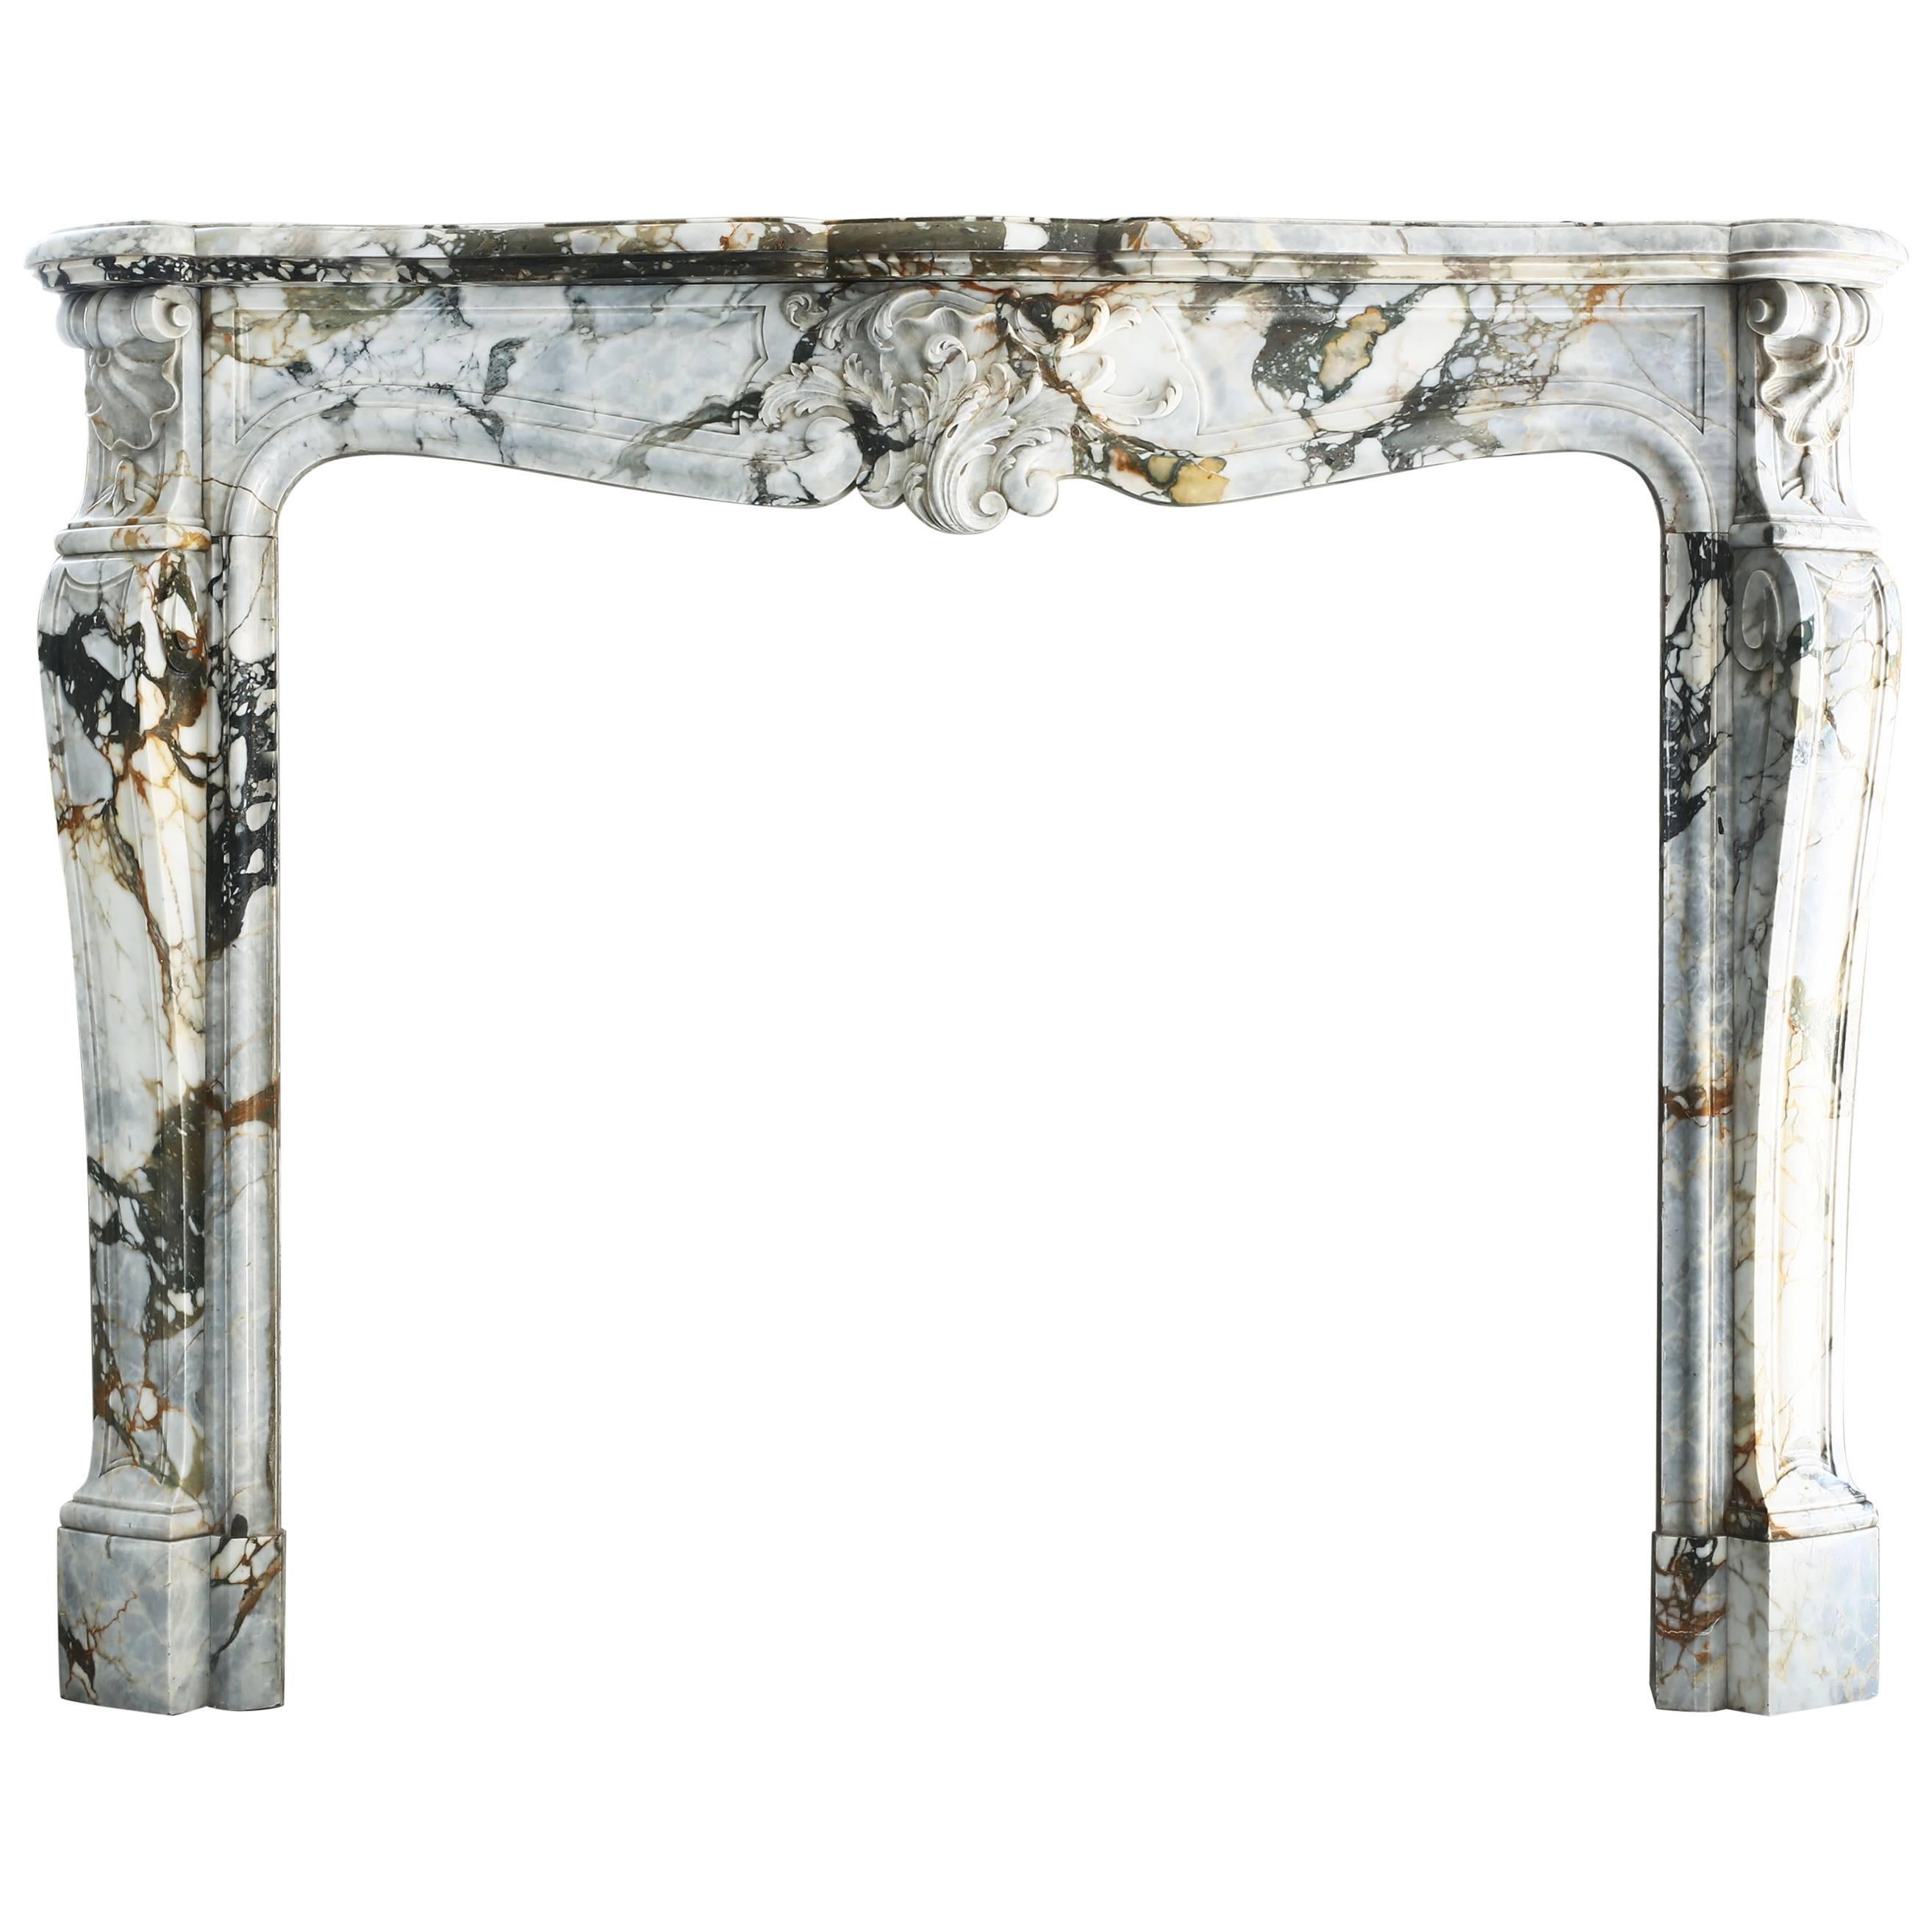 Paonazzo marble fireplace from Italy from Louis XV